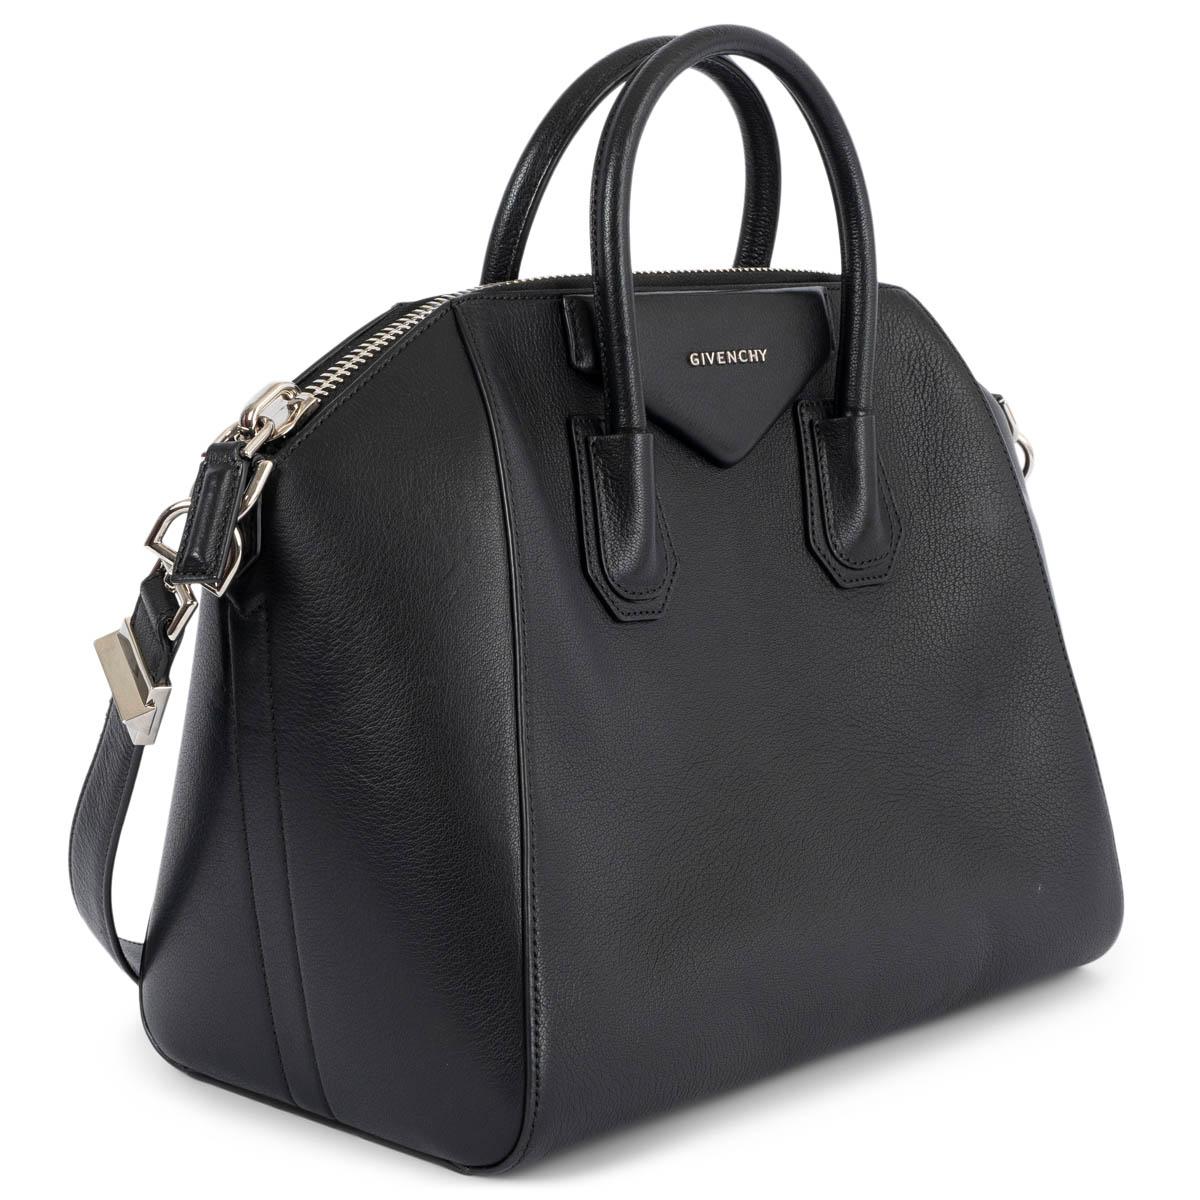 100% authentic Givenchy Antigona Medium duffle bag in black goatskin. Opens with a oversized silver-tone zipper on top and is lined in black canvas with one zipper pocket against the back and two open pockets against the front. Has been carried and